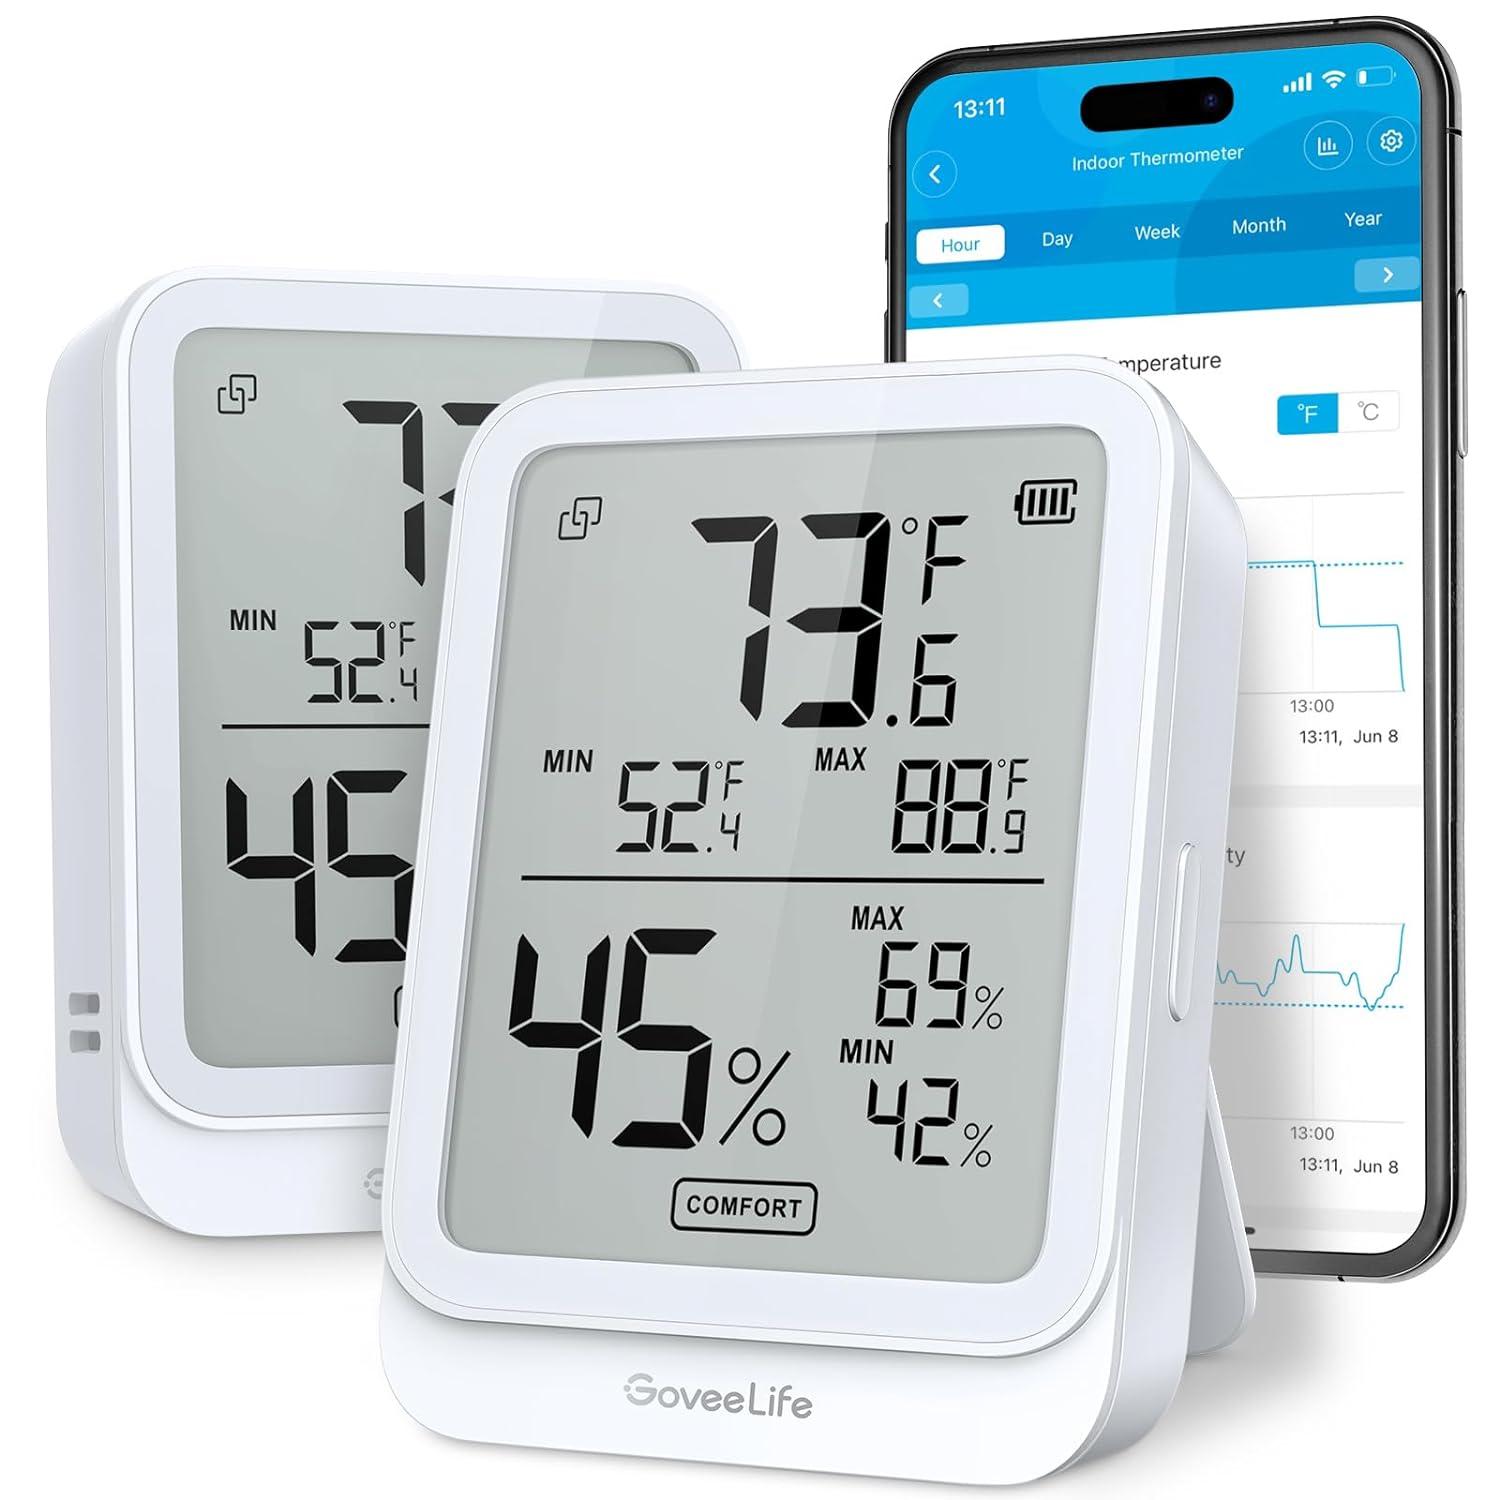 GoveeLife Hygrometer Thermometer H5104 2 Pack for $17.67